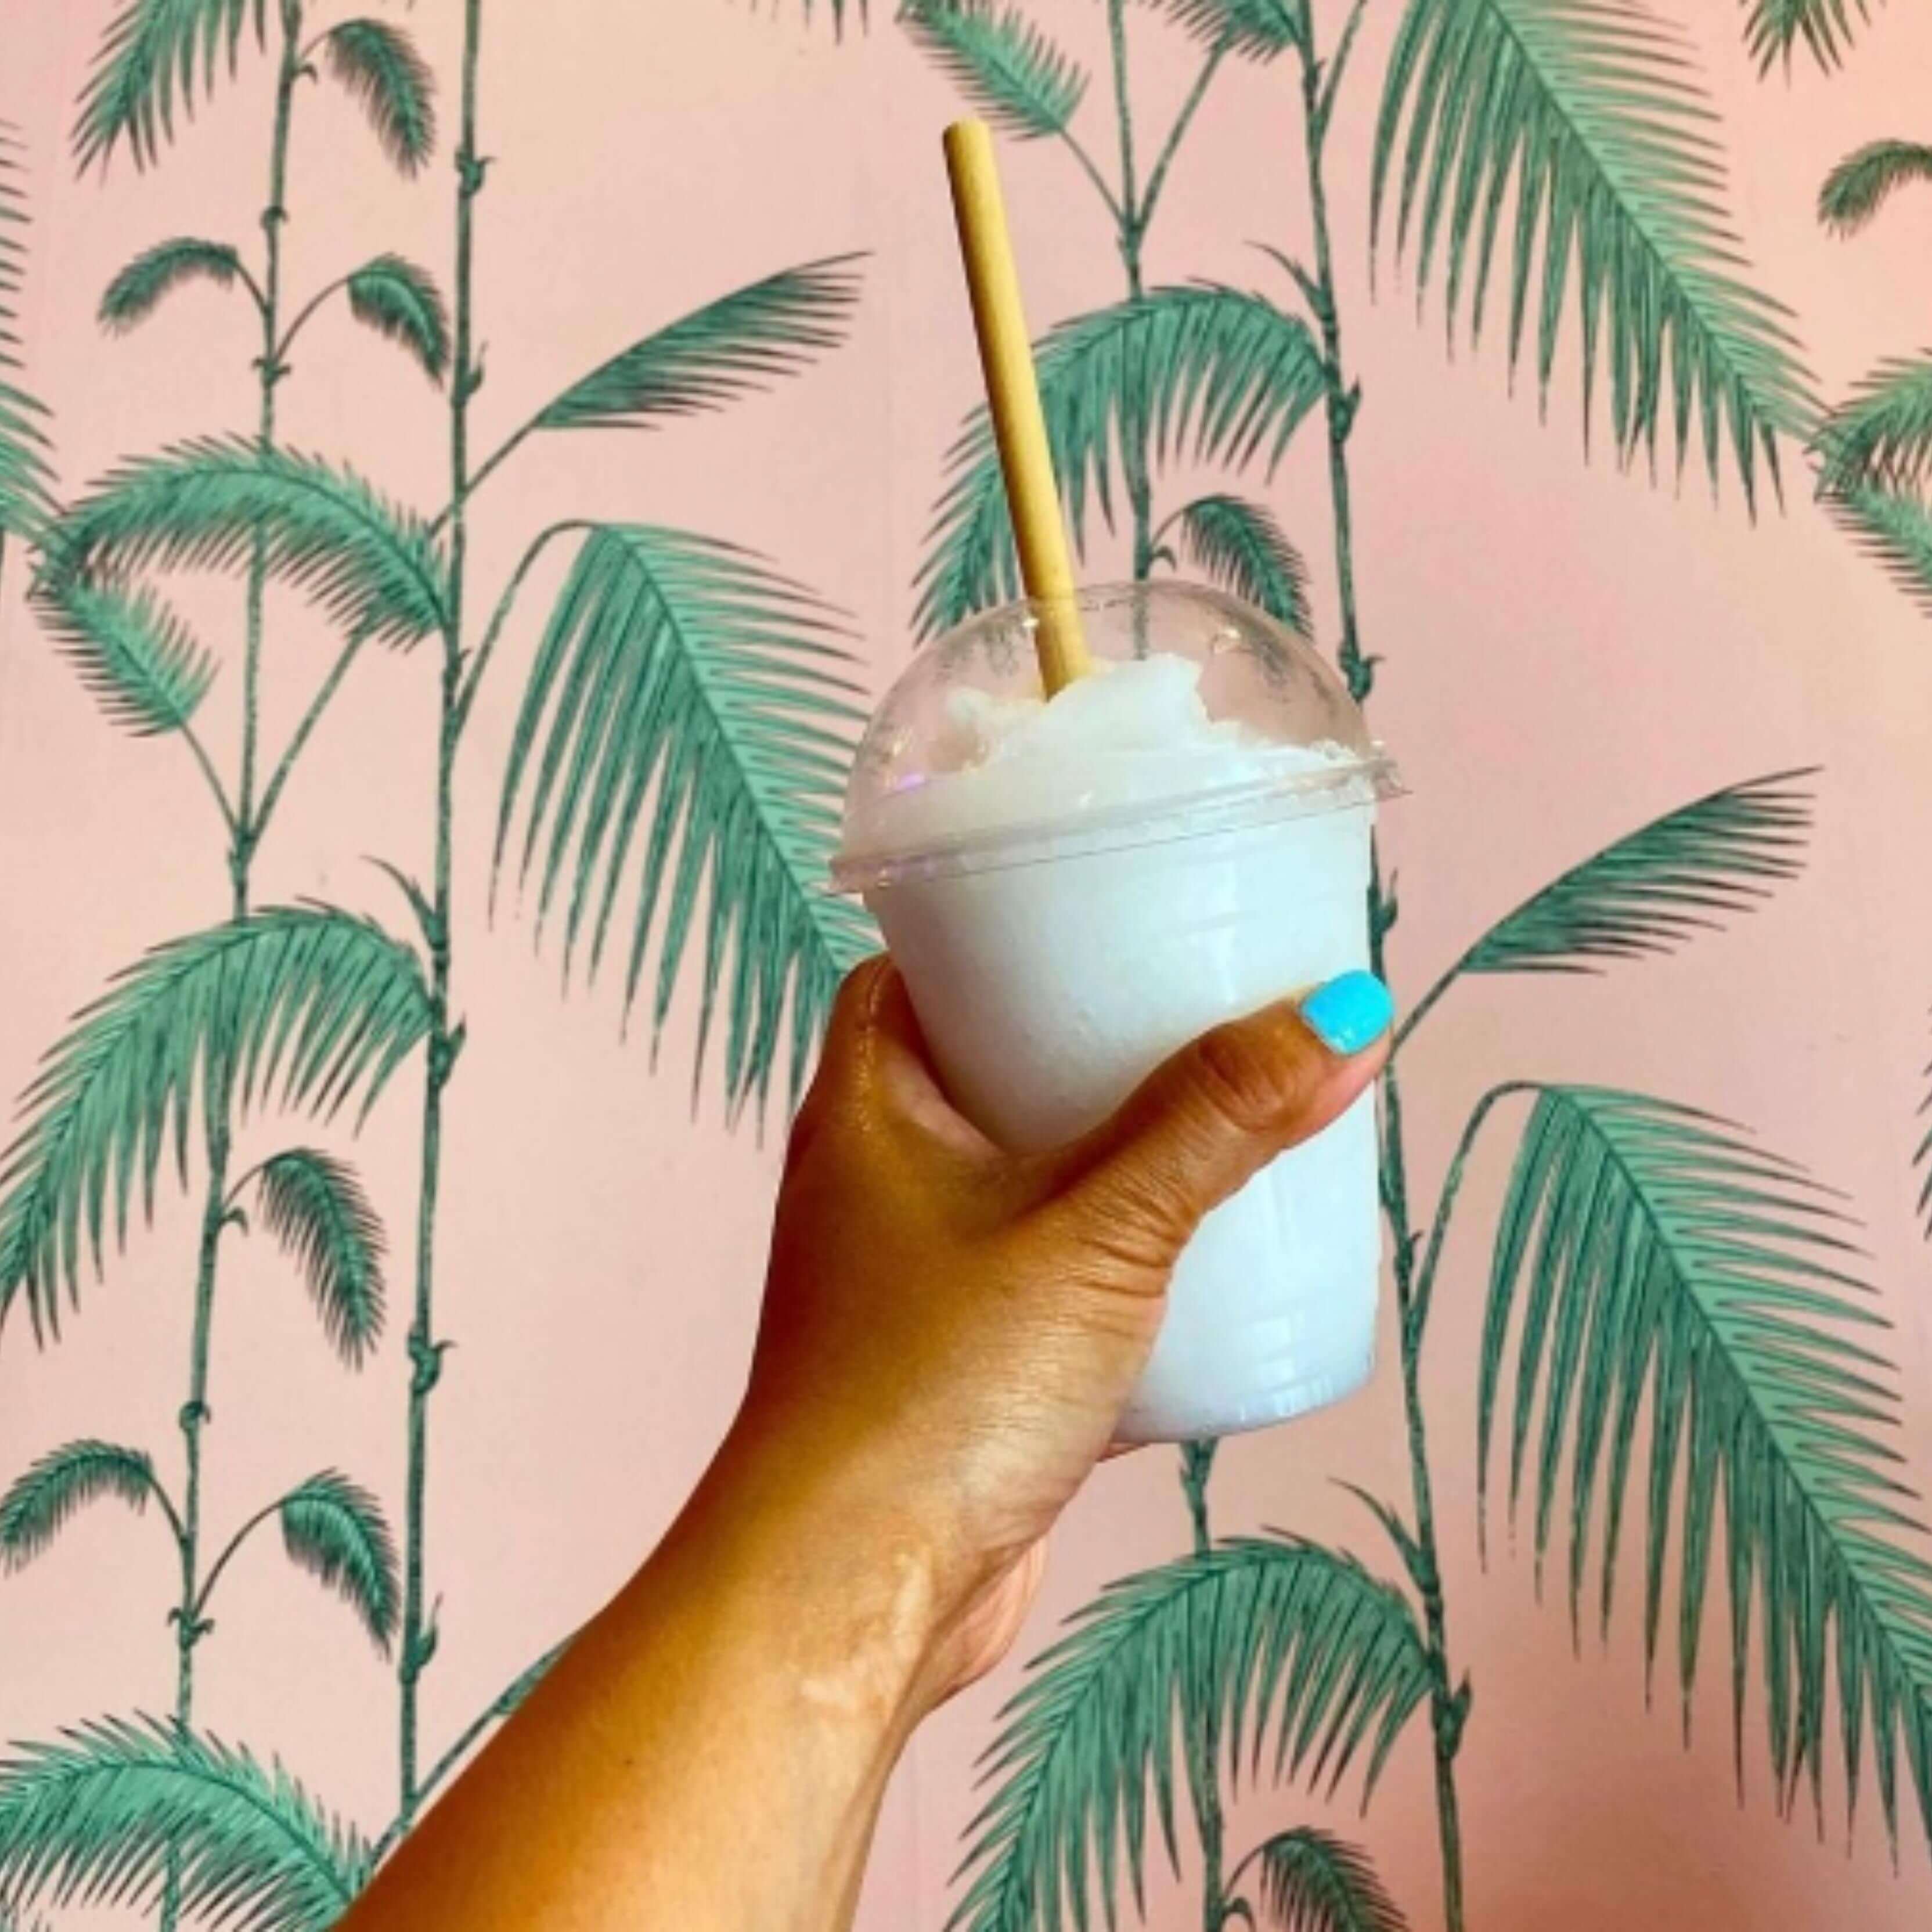 A hand with bright blue nail polish is holding an iced lemonade drink in a clear cup with a dome lid. A bamboo-like straw made from reed stems is inserted through the lid. The background features a pale pink wall with green palm tree designs, giving a tropical and refreshing feel to the scene. The eco-friendly straw and palm backdrop emphasize a playful, sustainable aesthetic.